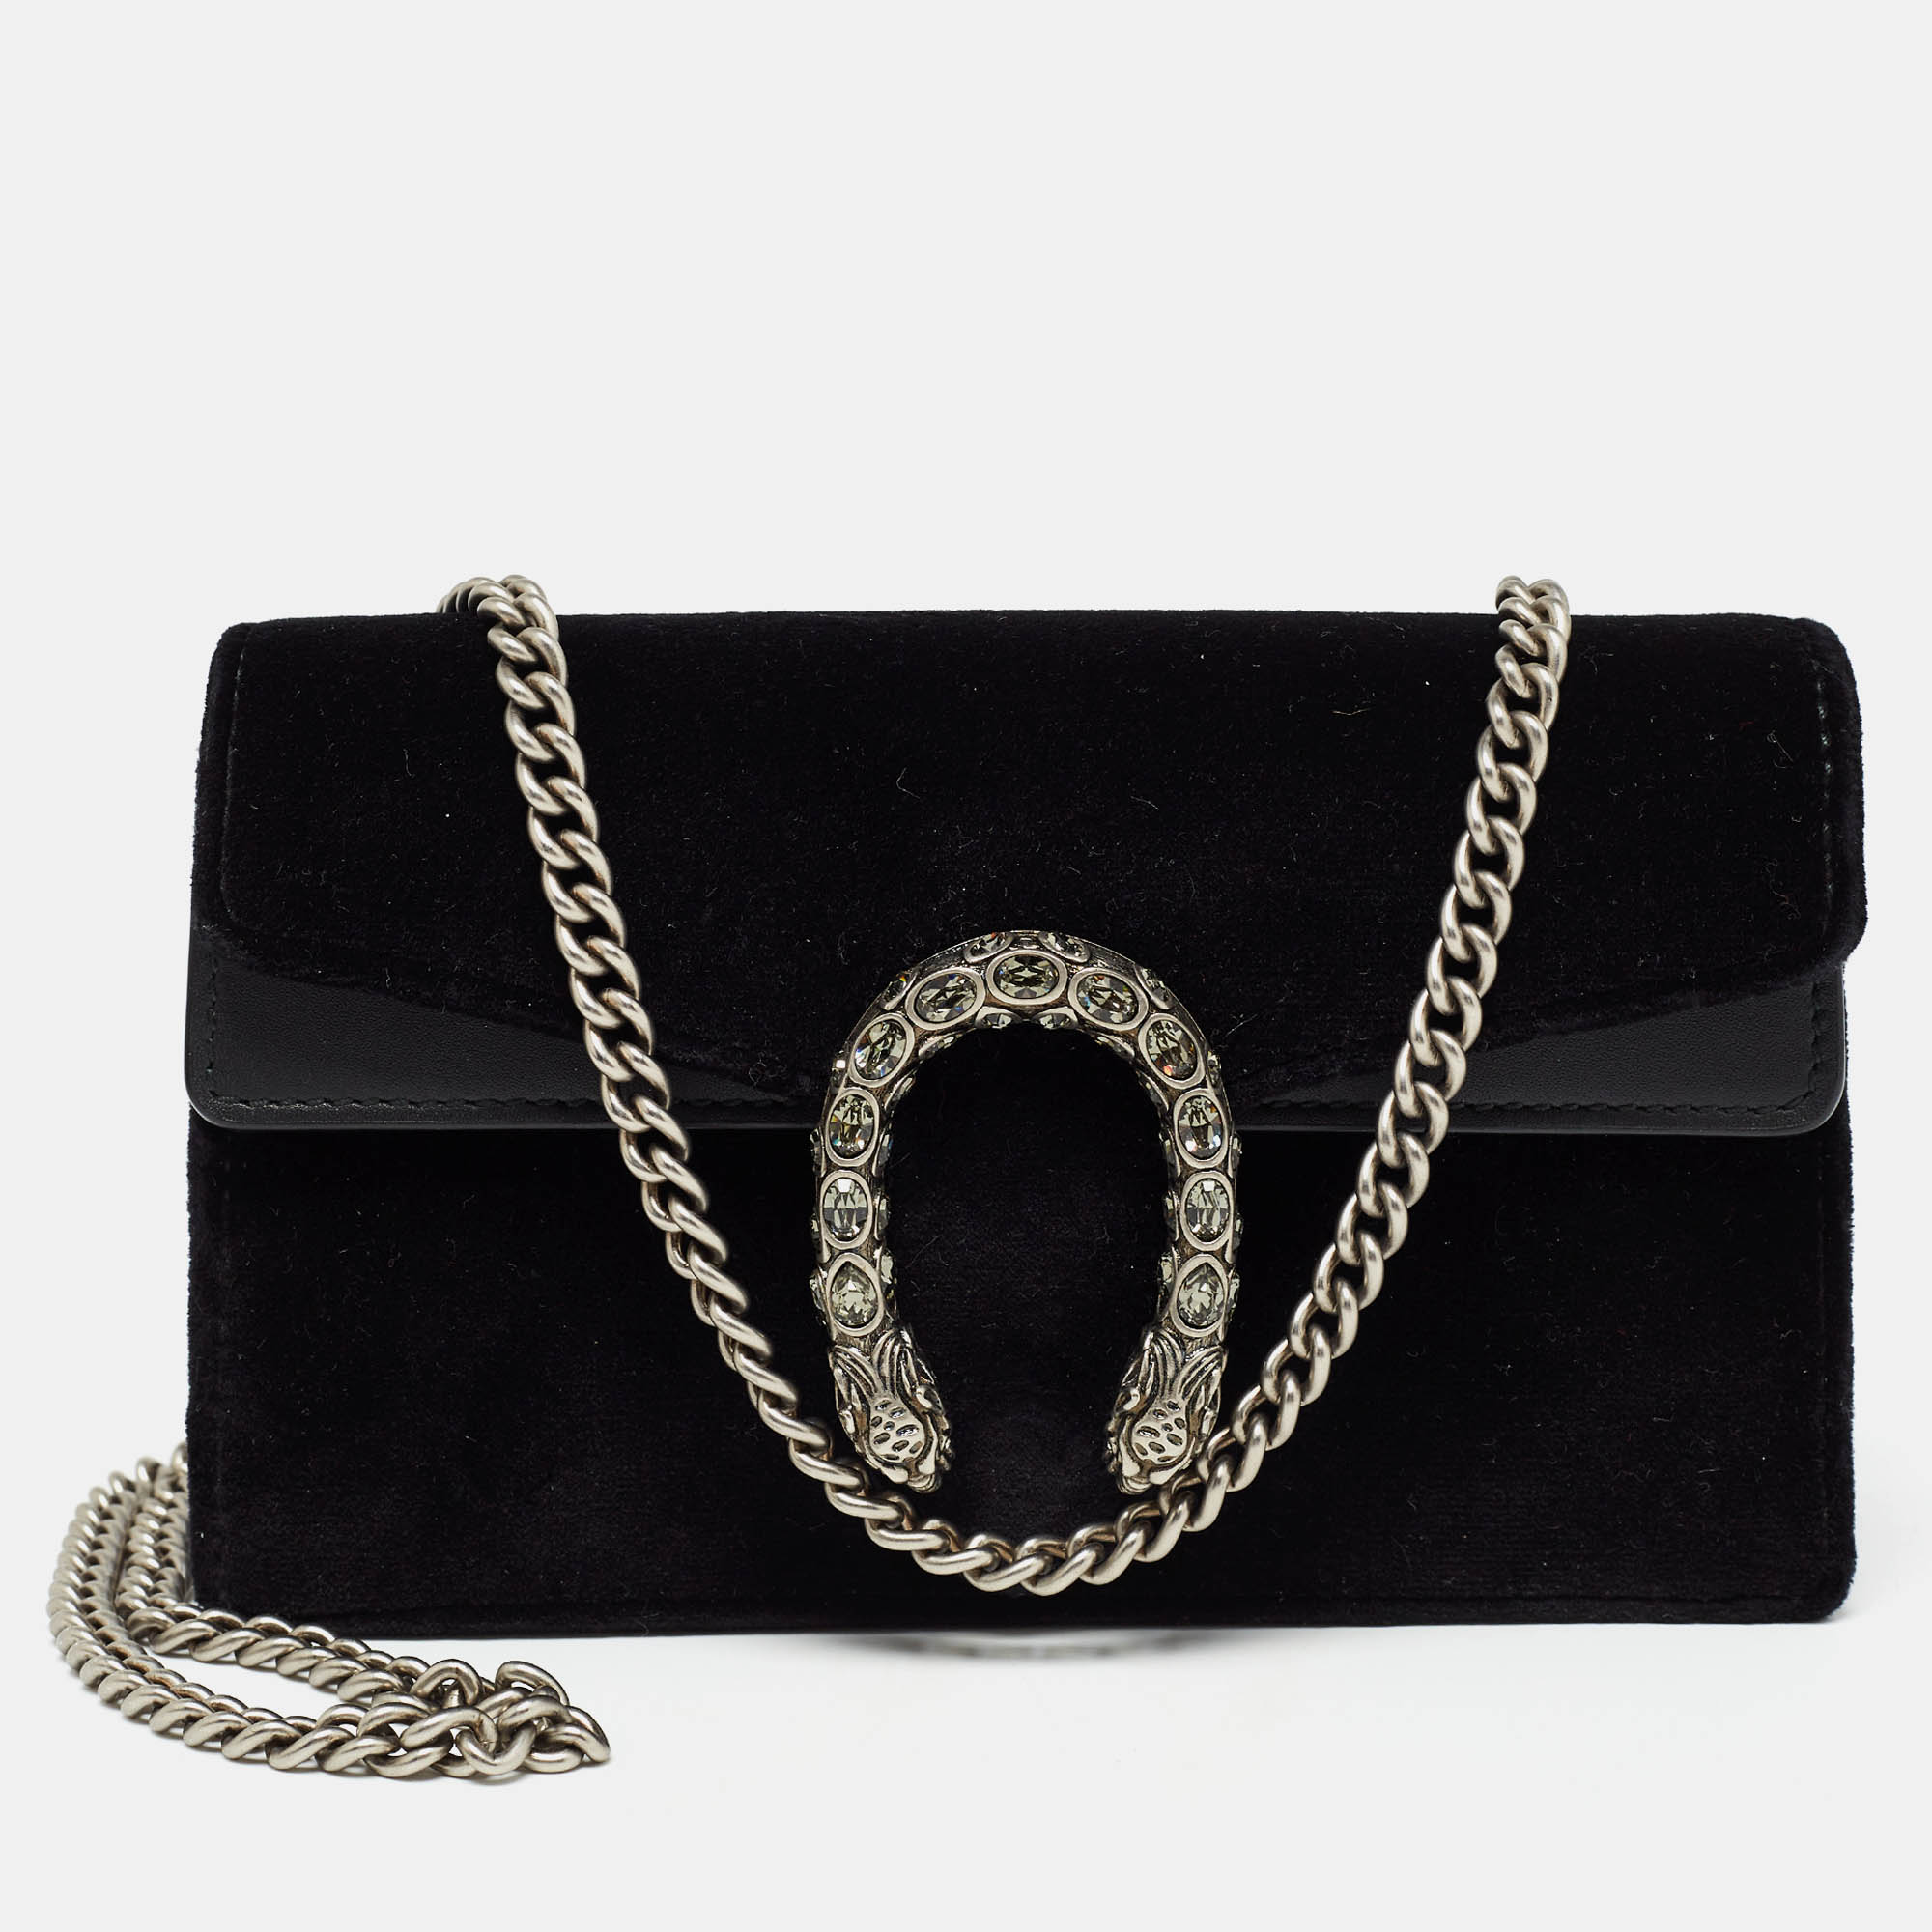 Gucci black leather and velvet super mini dionysus crystals chain bag